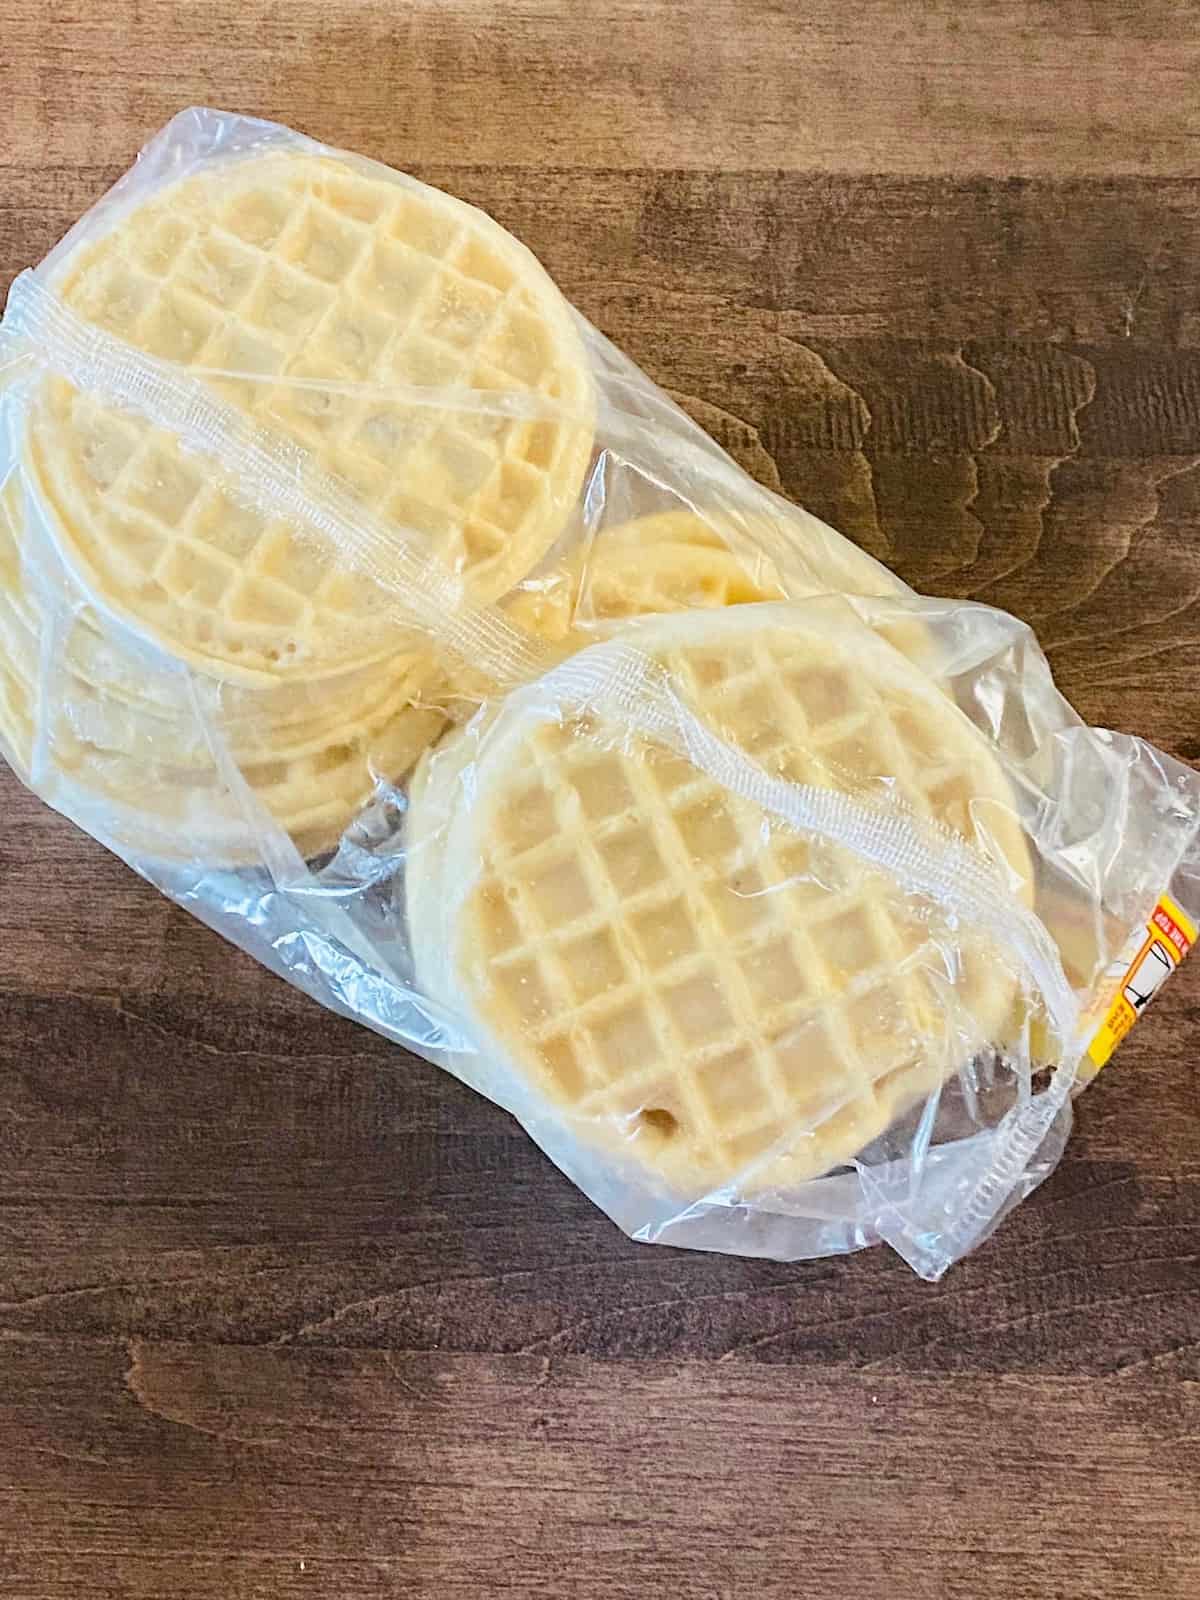 package of waffles sitting on the table ready to cook